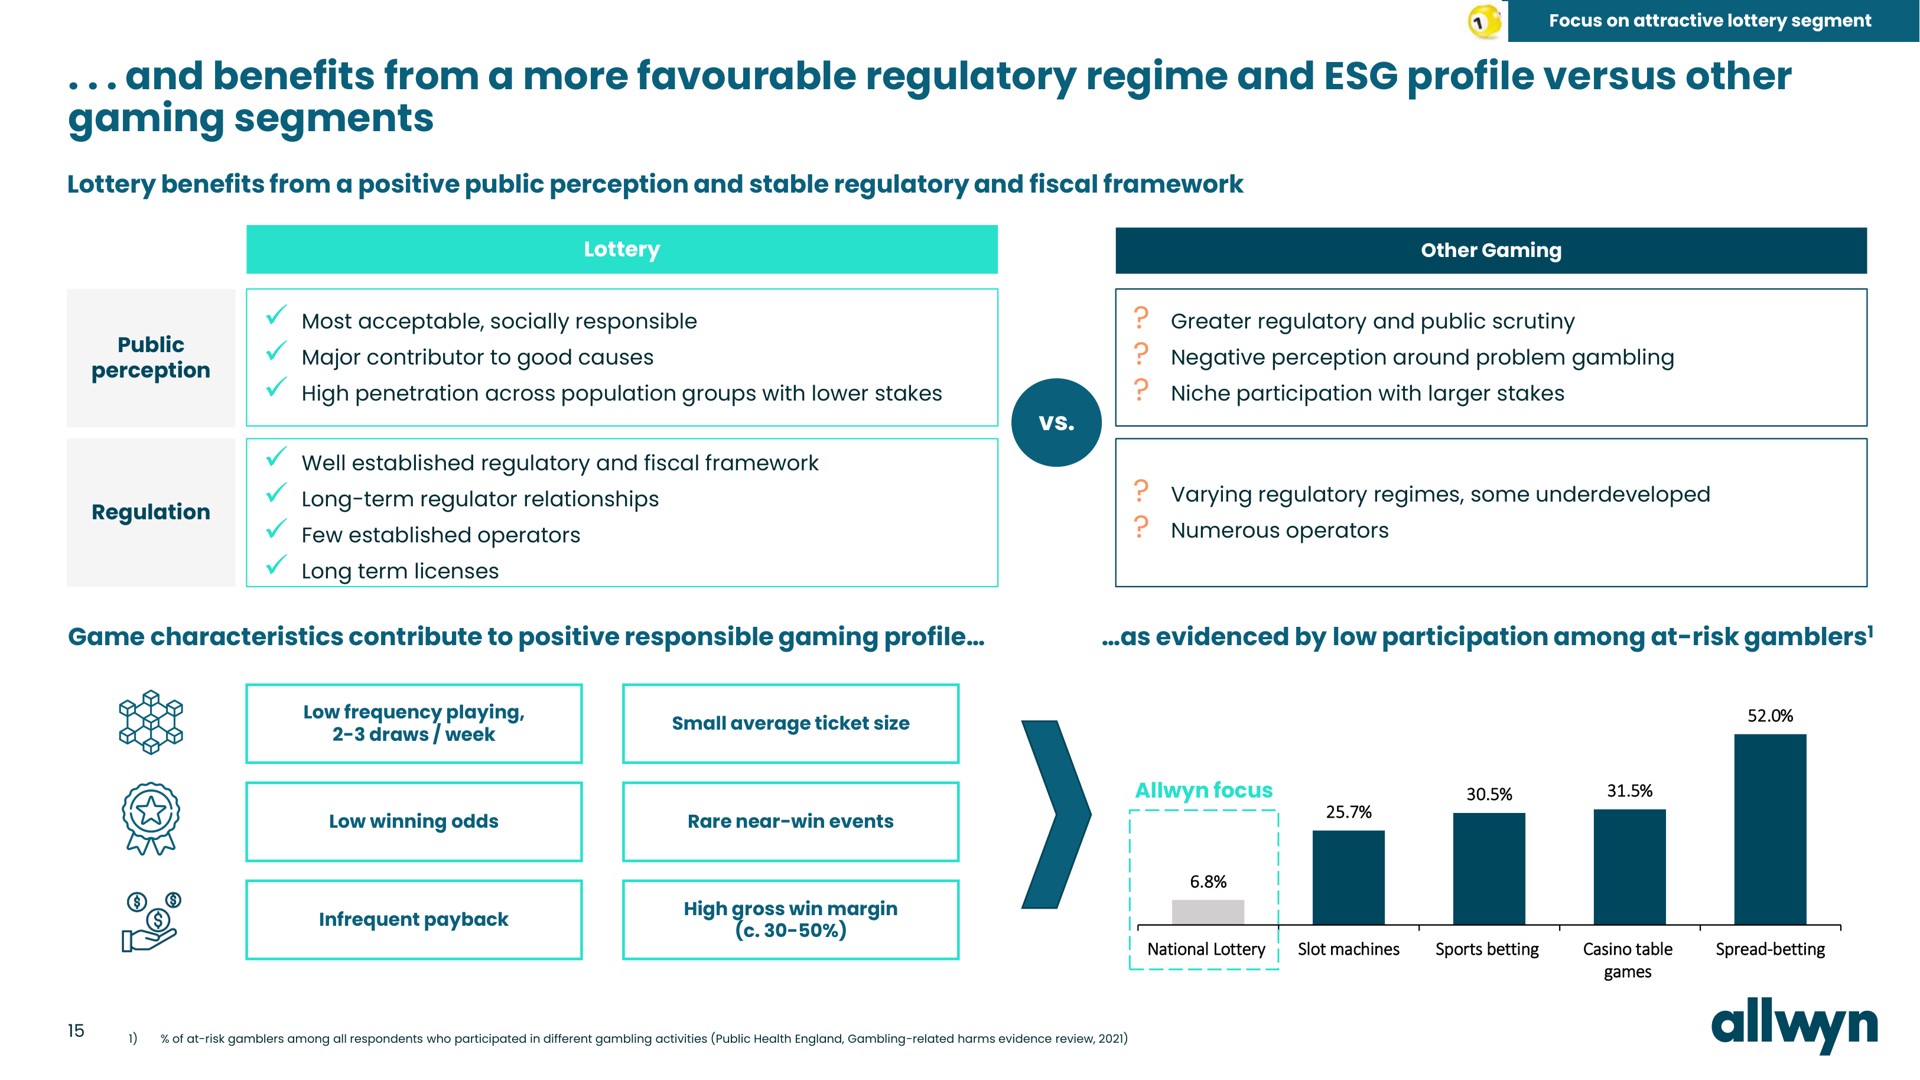 and benefits from a more regulatory regime and profile versus other gaming segments | Allwyn